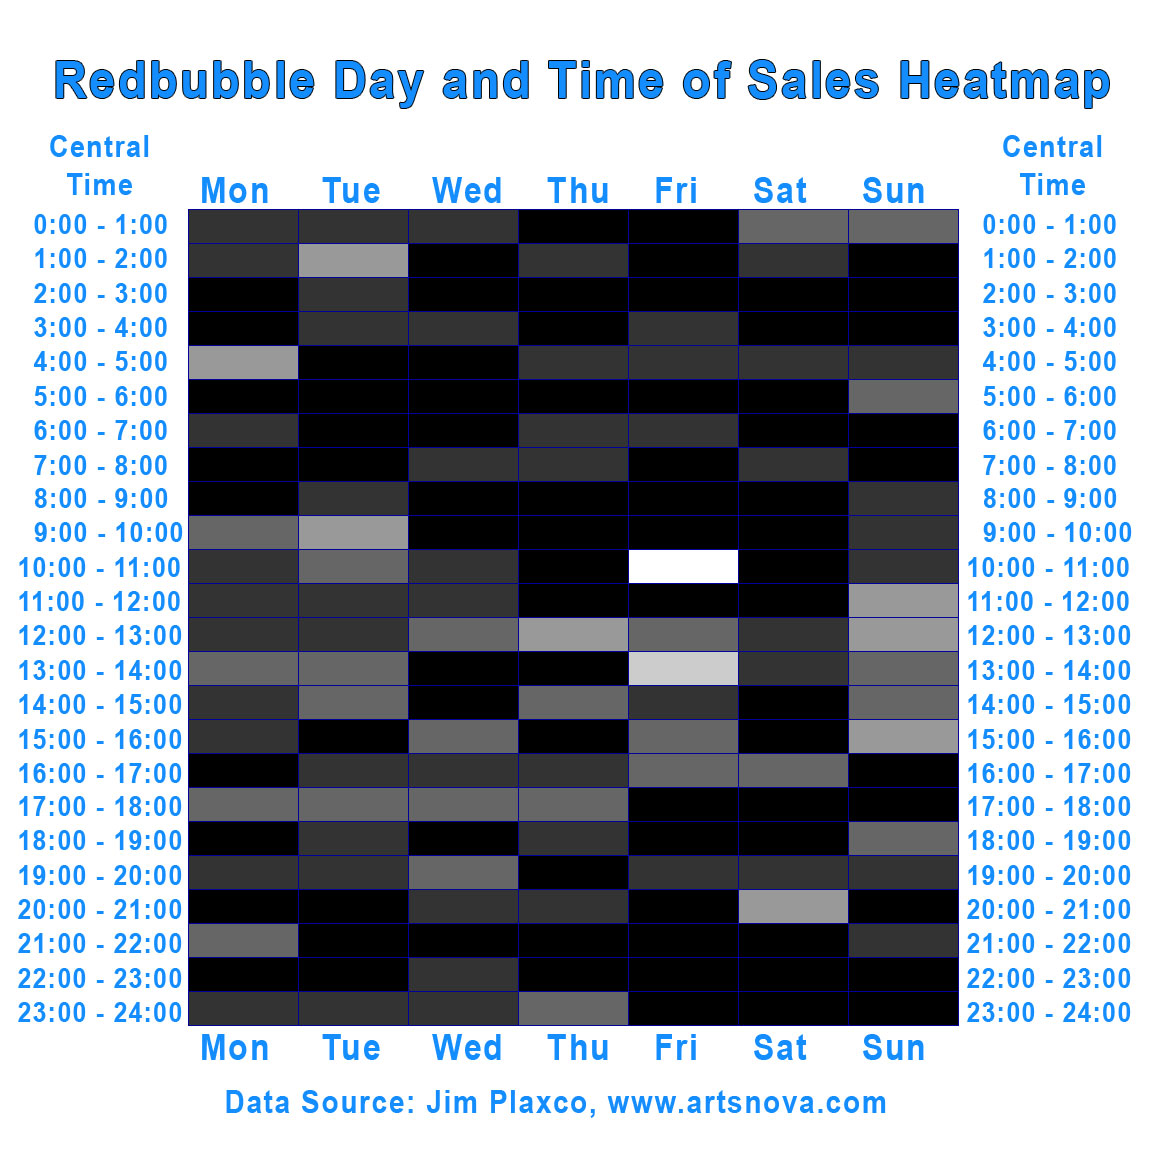 Redbubble Day of Week and Time of Day Sales Heatmap